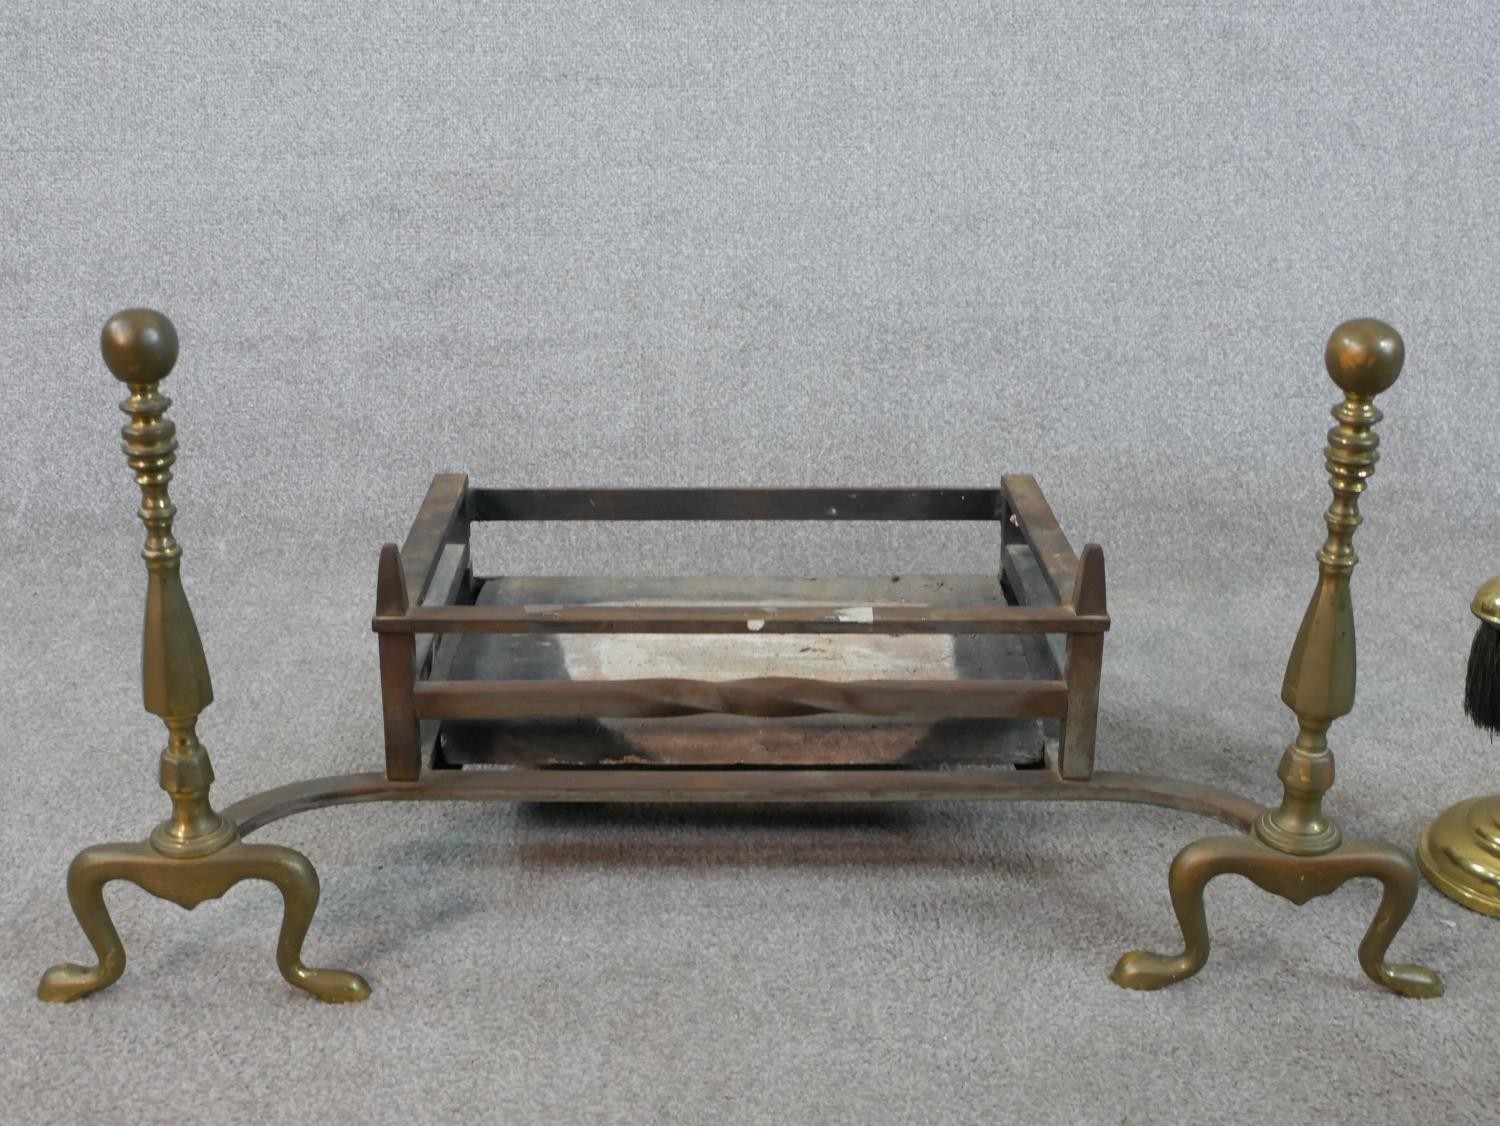 A 19th century iron fire basket complete with a pair of brass andirons, together with an - Image 2 of 7